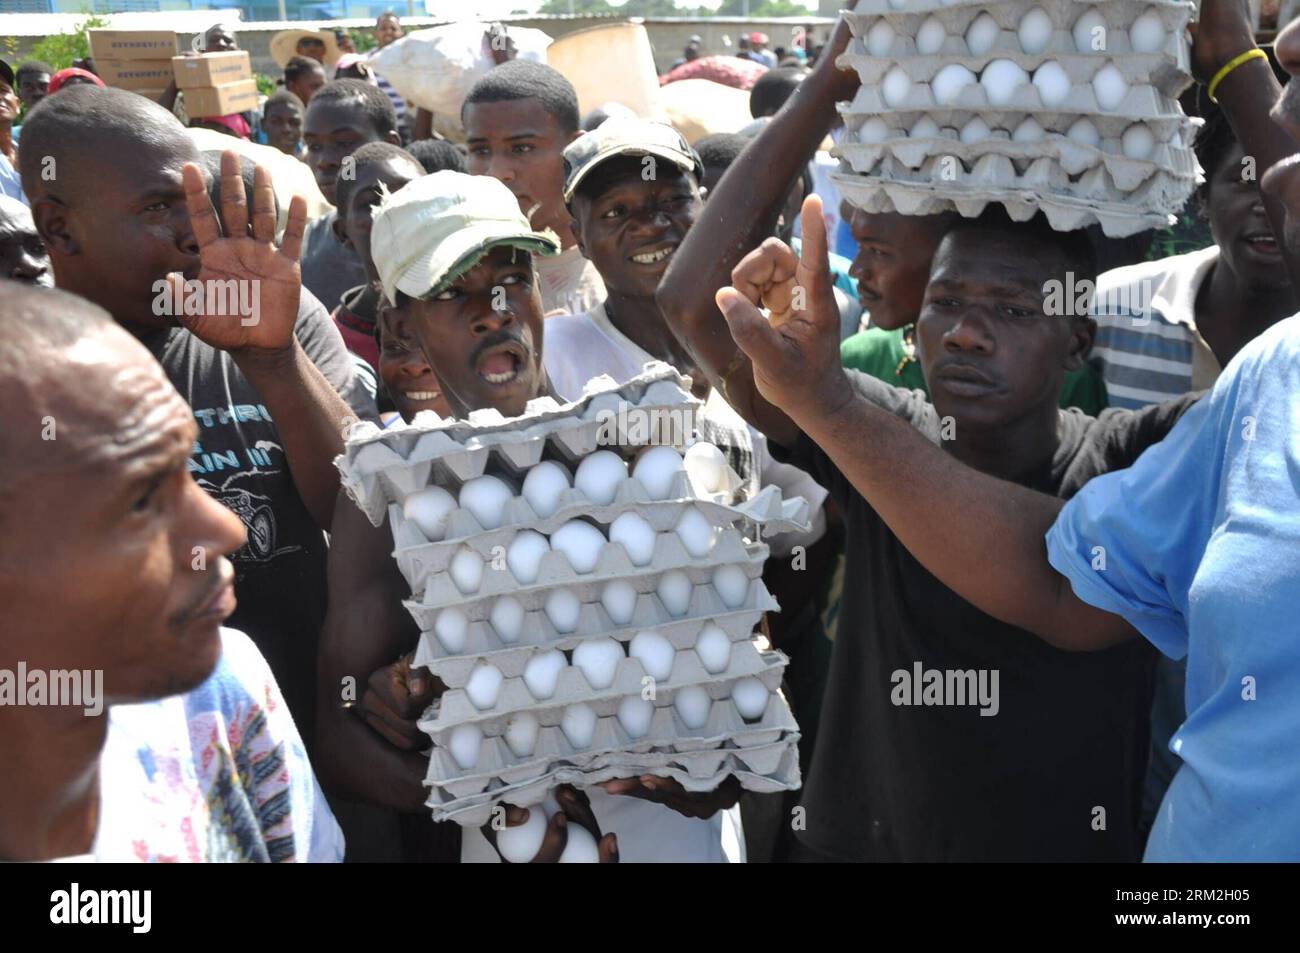 Bildnummer: 59836089  Datum: 14.06.2013  Copyright: imago/Xinhua DAJABON, June 14, 2013 - Haitian men try to take eggs to their country as being prohibited from importing poultry from Dominica, at the Dominican-Haitian border in Dajabon province, Dominica, on June 14, 2013. The Haitian goverment forbids the import of poultry products from Dominican Republic to prevent avian flu in its country, according to the Industry and Comerce, and Agriculture Ministries of Haiti. Dominican authorities said there isn t avian flu in the country, and they expect Haiti s government to stop the ban. (Xinhua/On Stock Photo